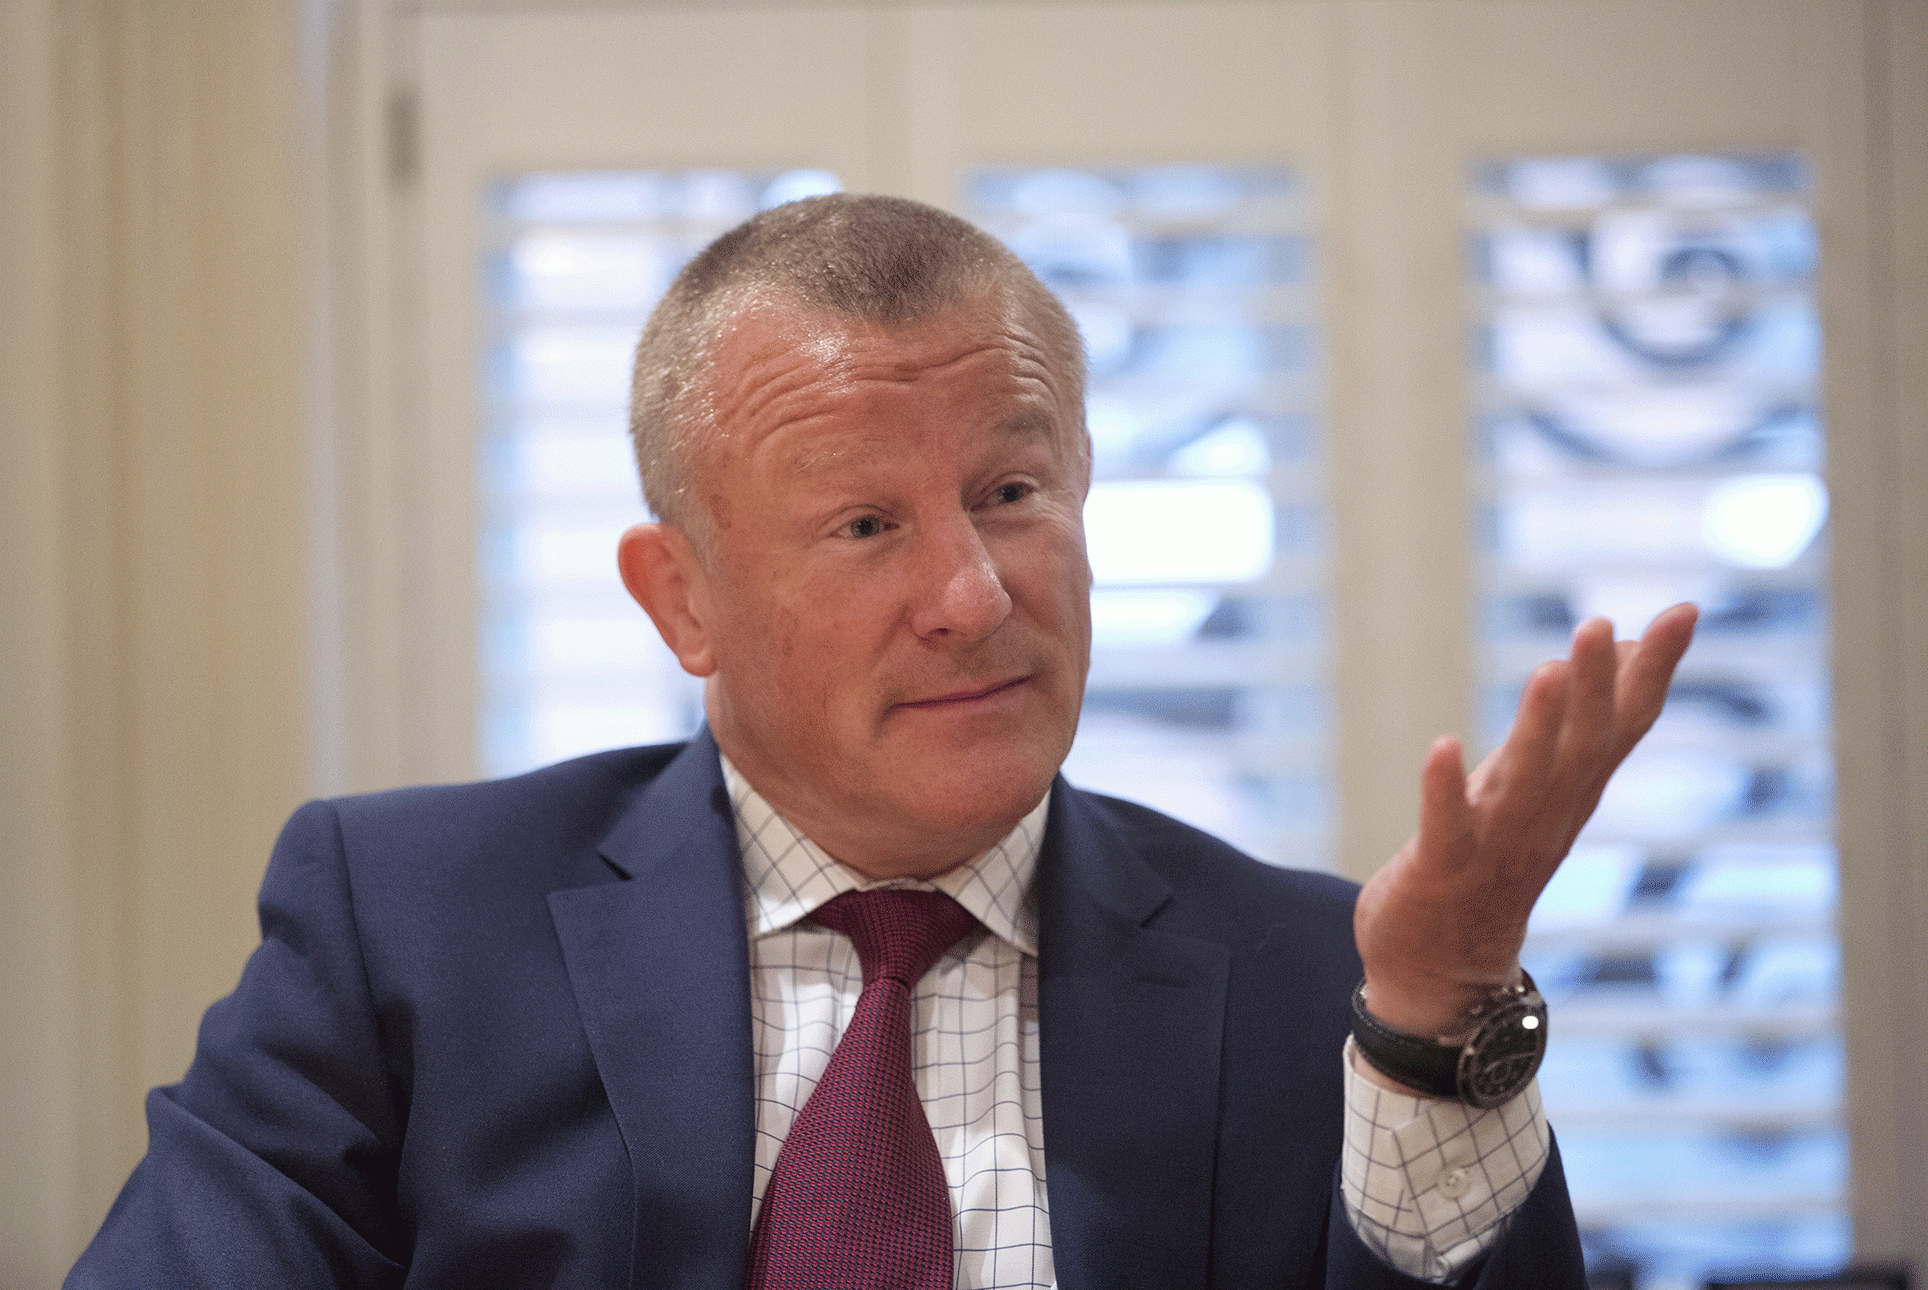 Neil Woodford has cancelled all bonuses at his firm